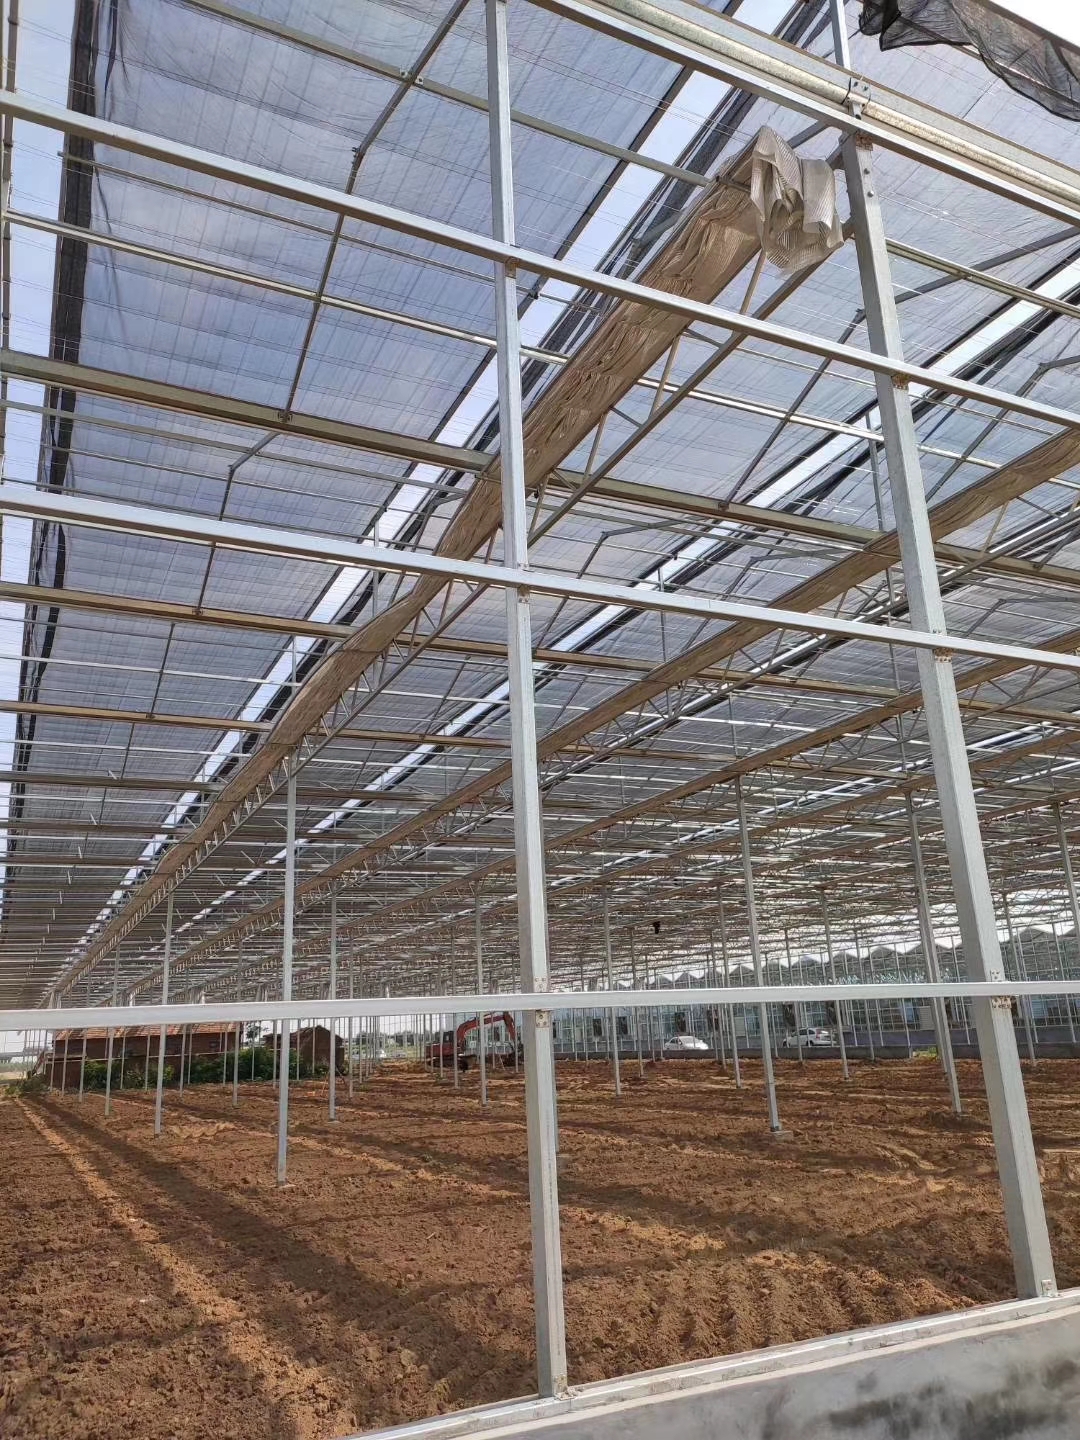 Bakway Multilayer Polycarbonate Sheet project---over 4000sqm greenhouse covering